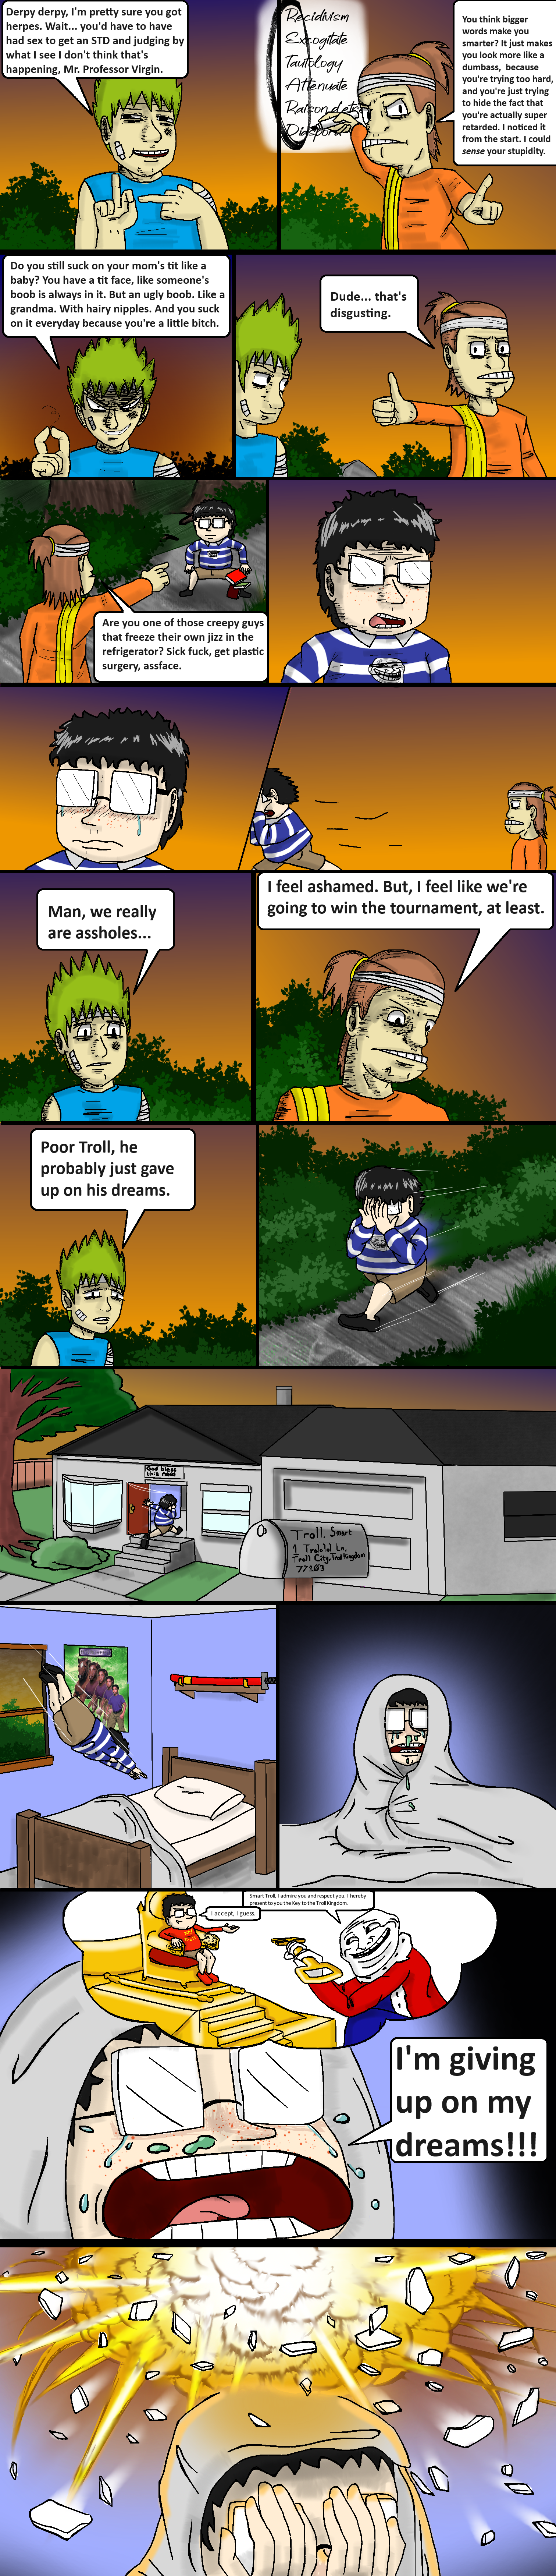 underbite/pg34.png. If you're seeing this, enable images. Or, perhaps we have a website issue. Try refreshing, if unsuccessful email commodorian@tailsgetstrolled.org with a detailed description of how you got here.